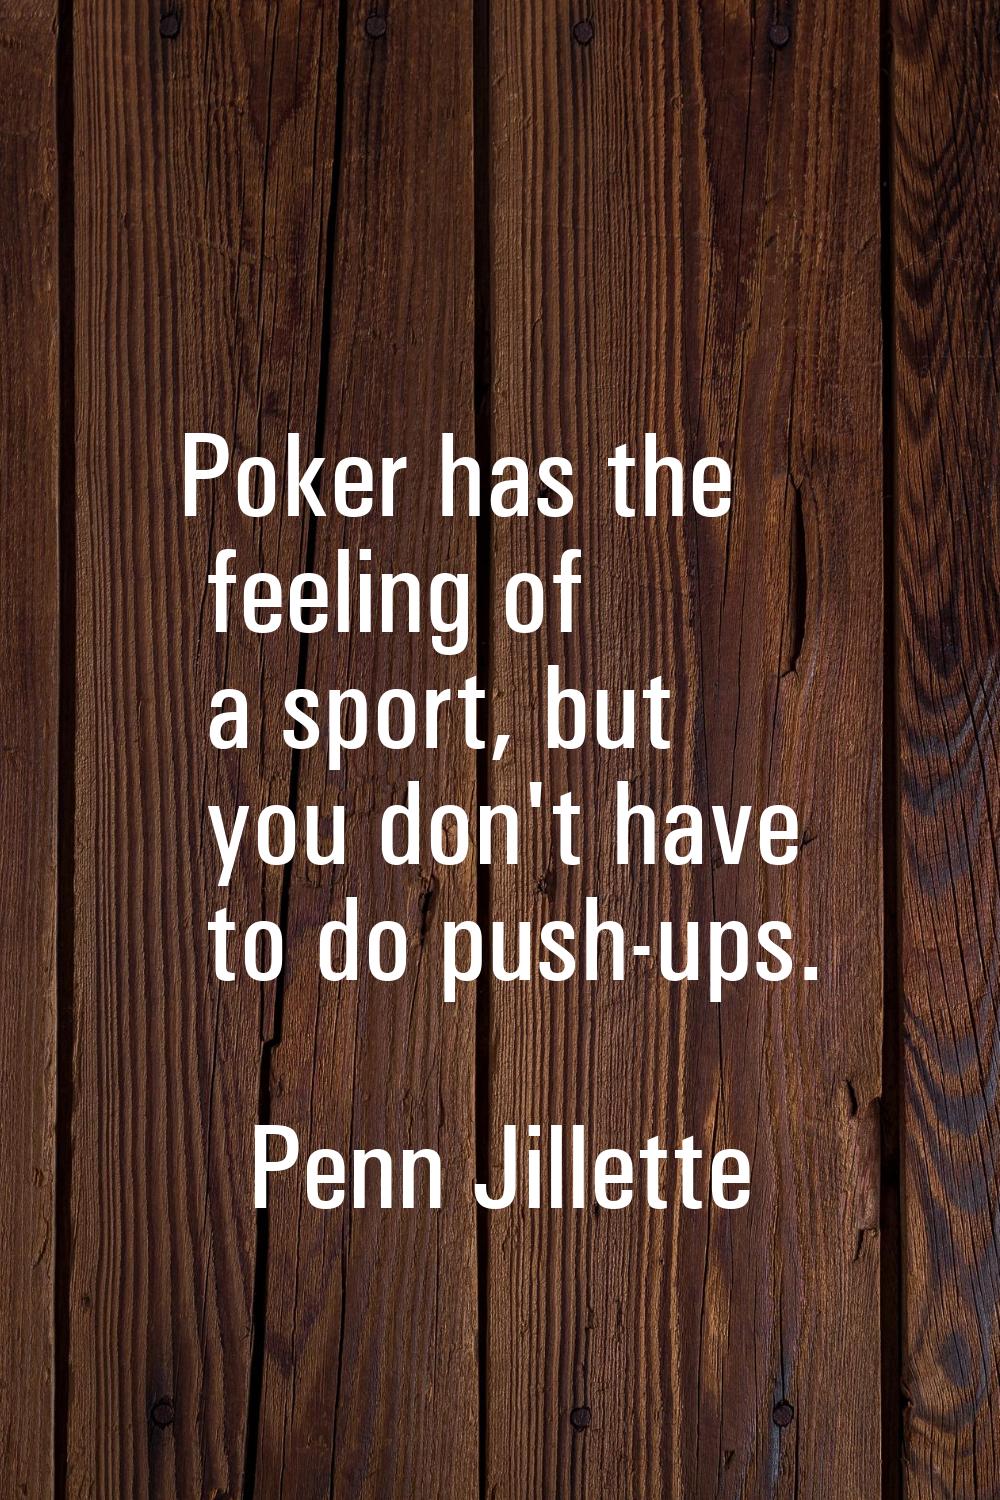 Poker has the feeling of a sport, but you don't have to do push-ups.